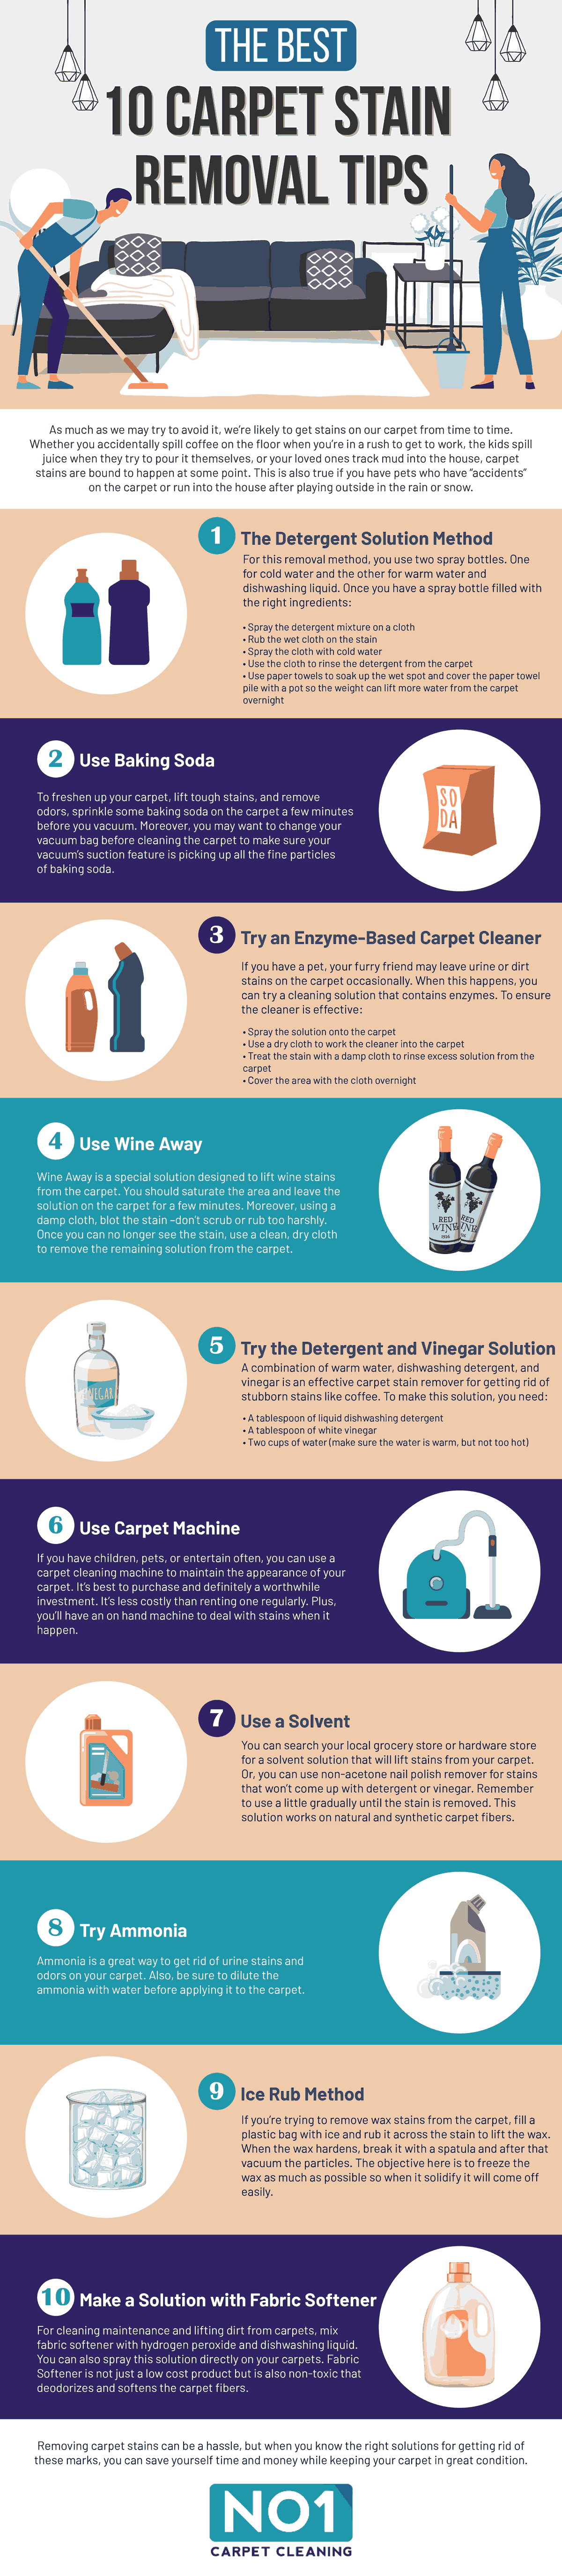 The Best 10 Carpet Stain Removal Tips